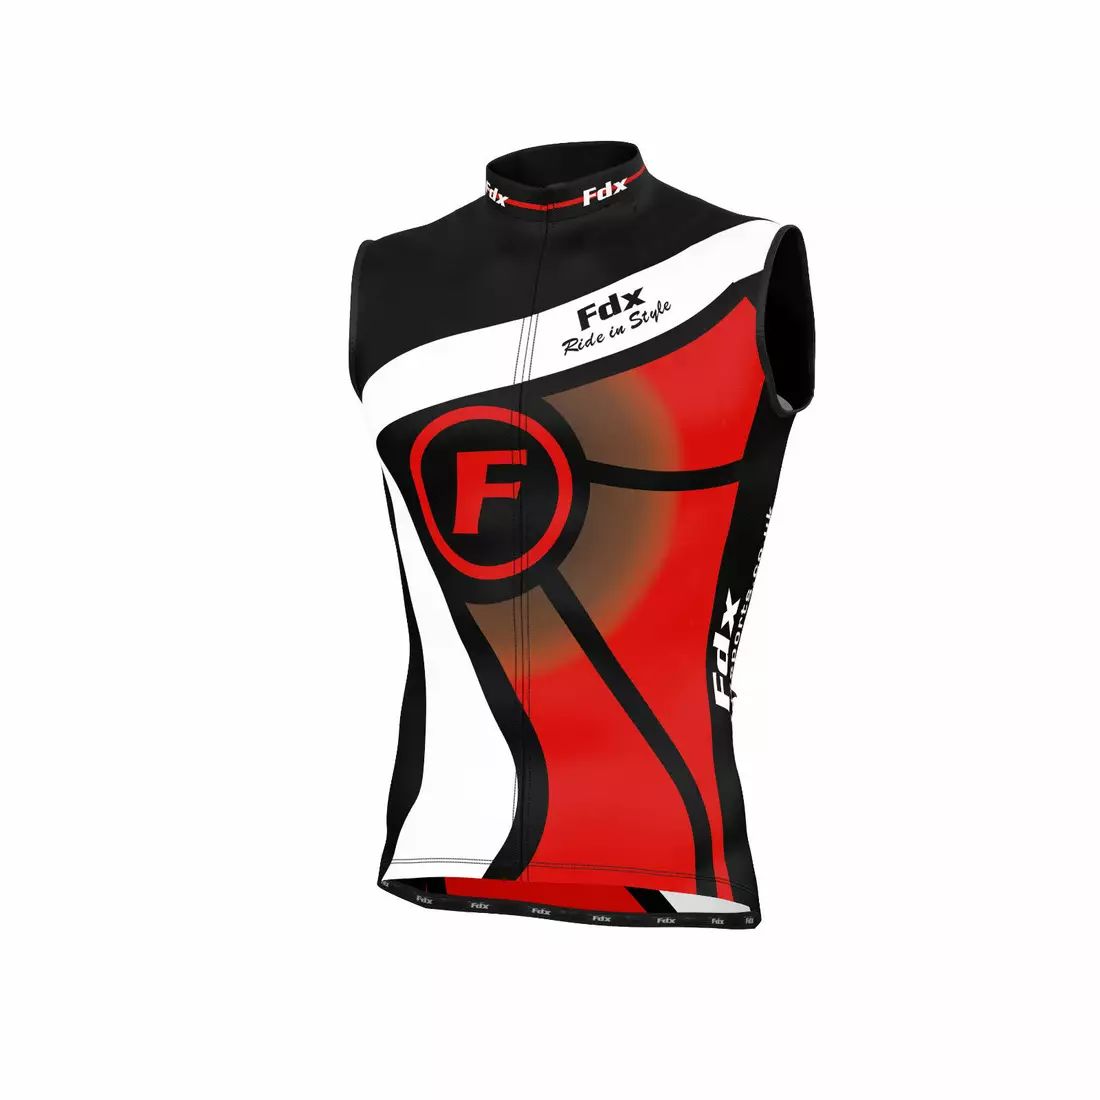 FDX 1020 men's sleeveless cycling jersey black and red